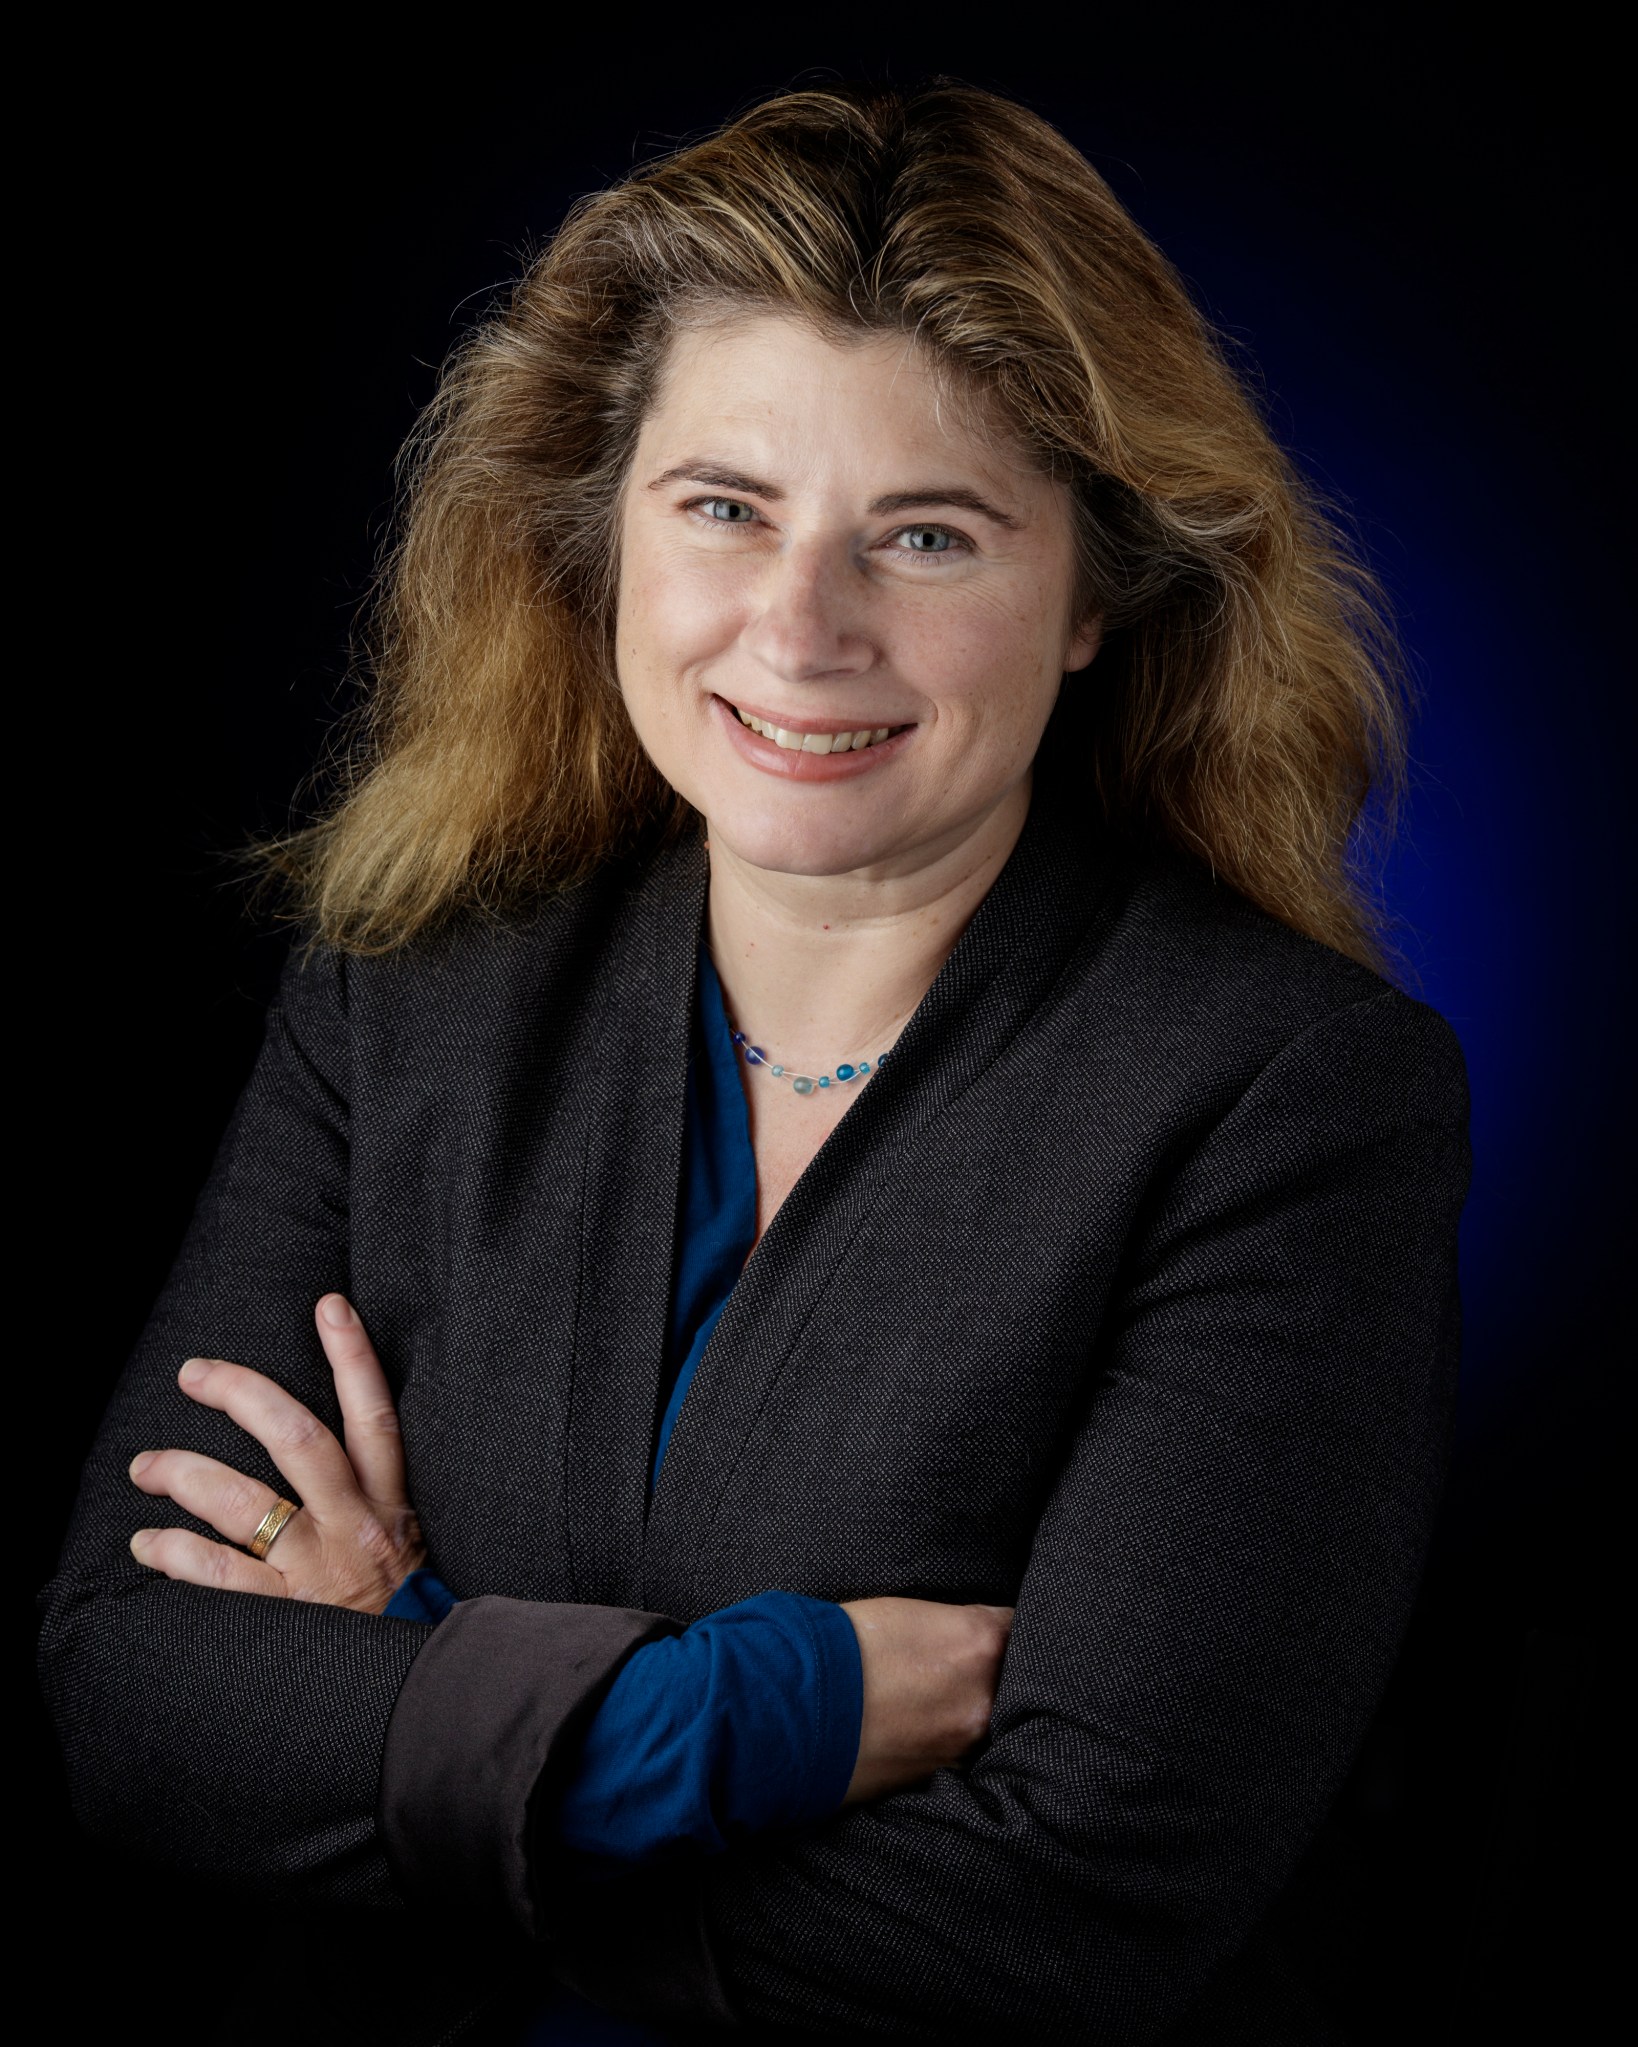 Woman with fair skin and long brown/blonde hair wears a blue shirt and black textured blazer, along with a gold wedding ring. She is smiling and standing against a black and blue background. 